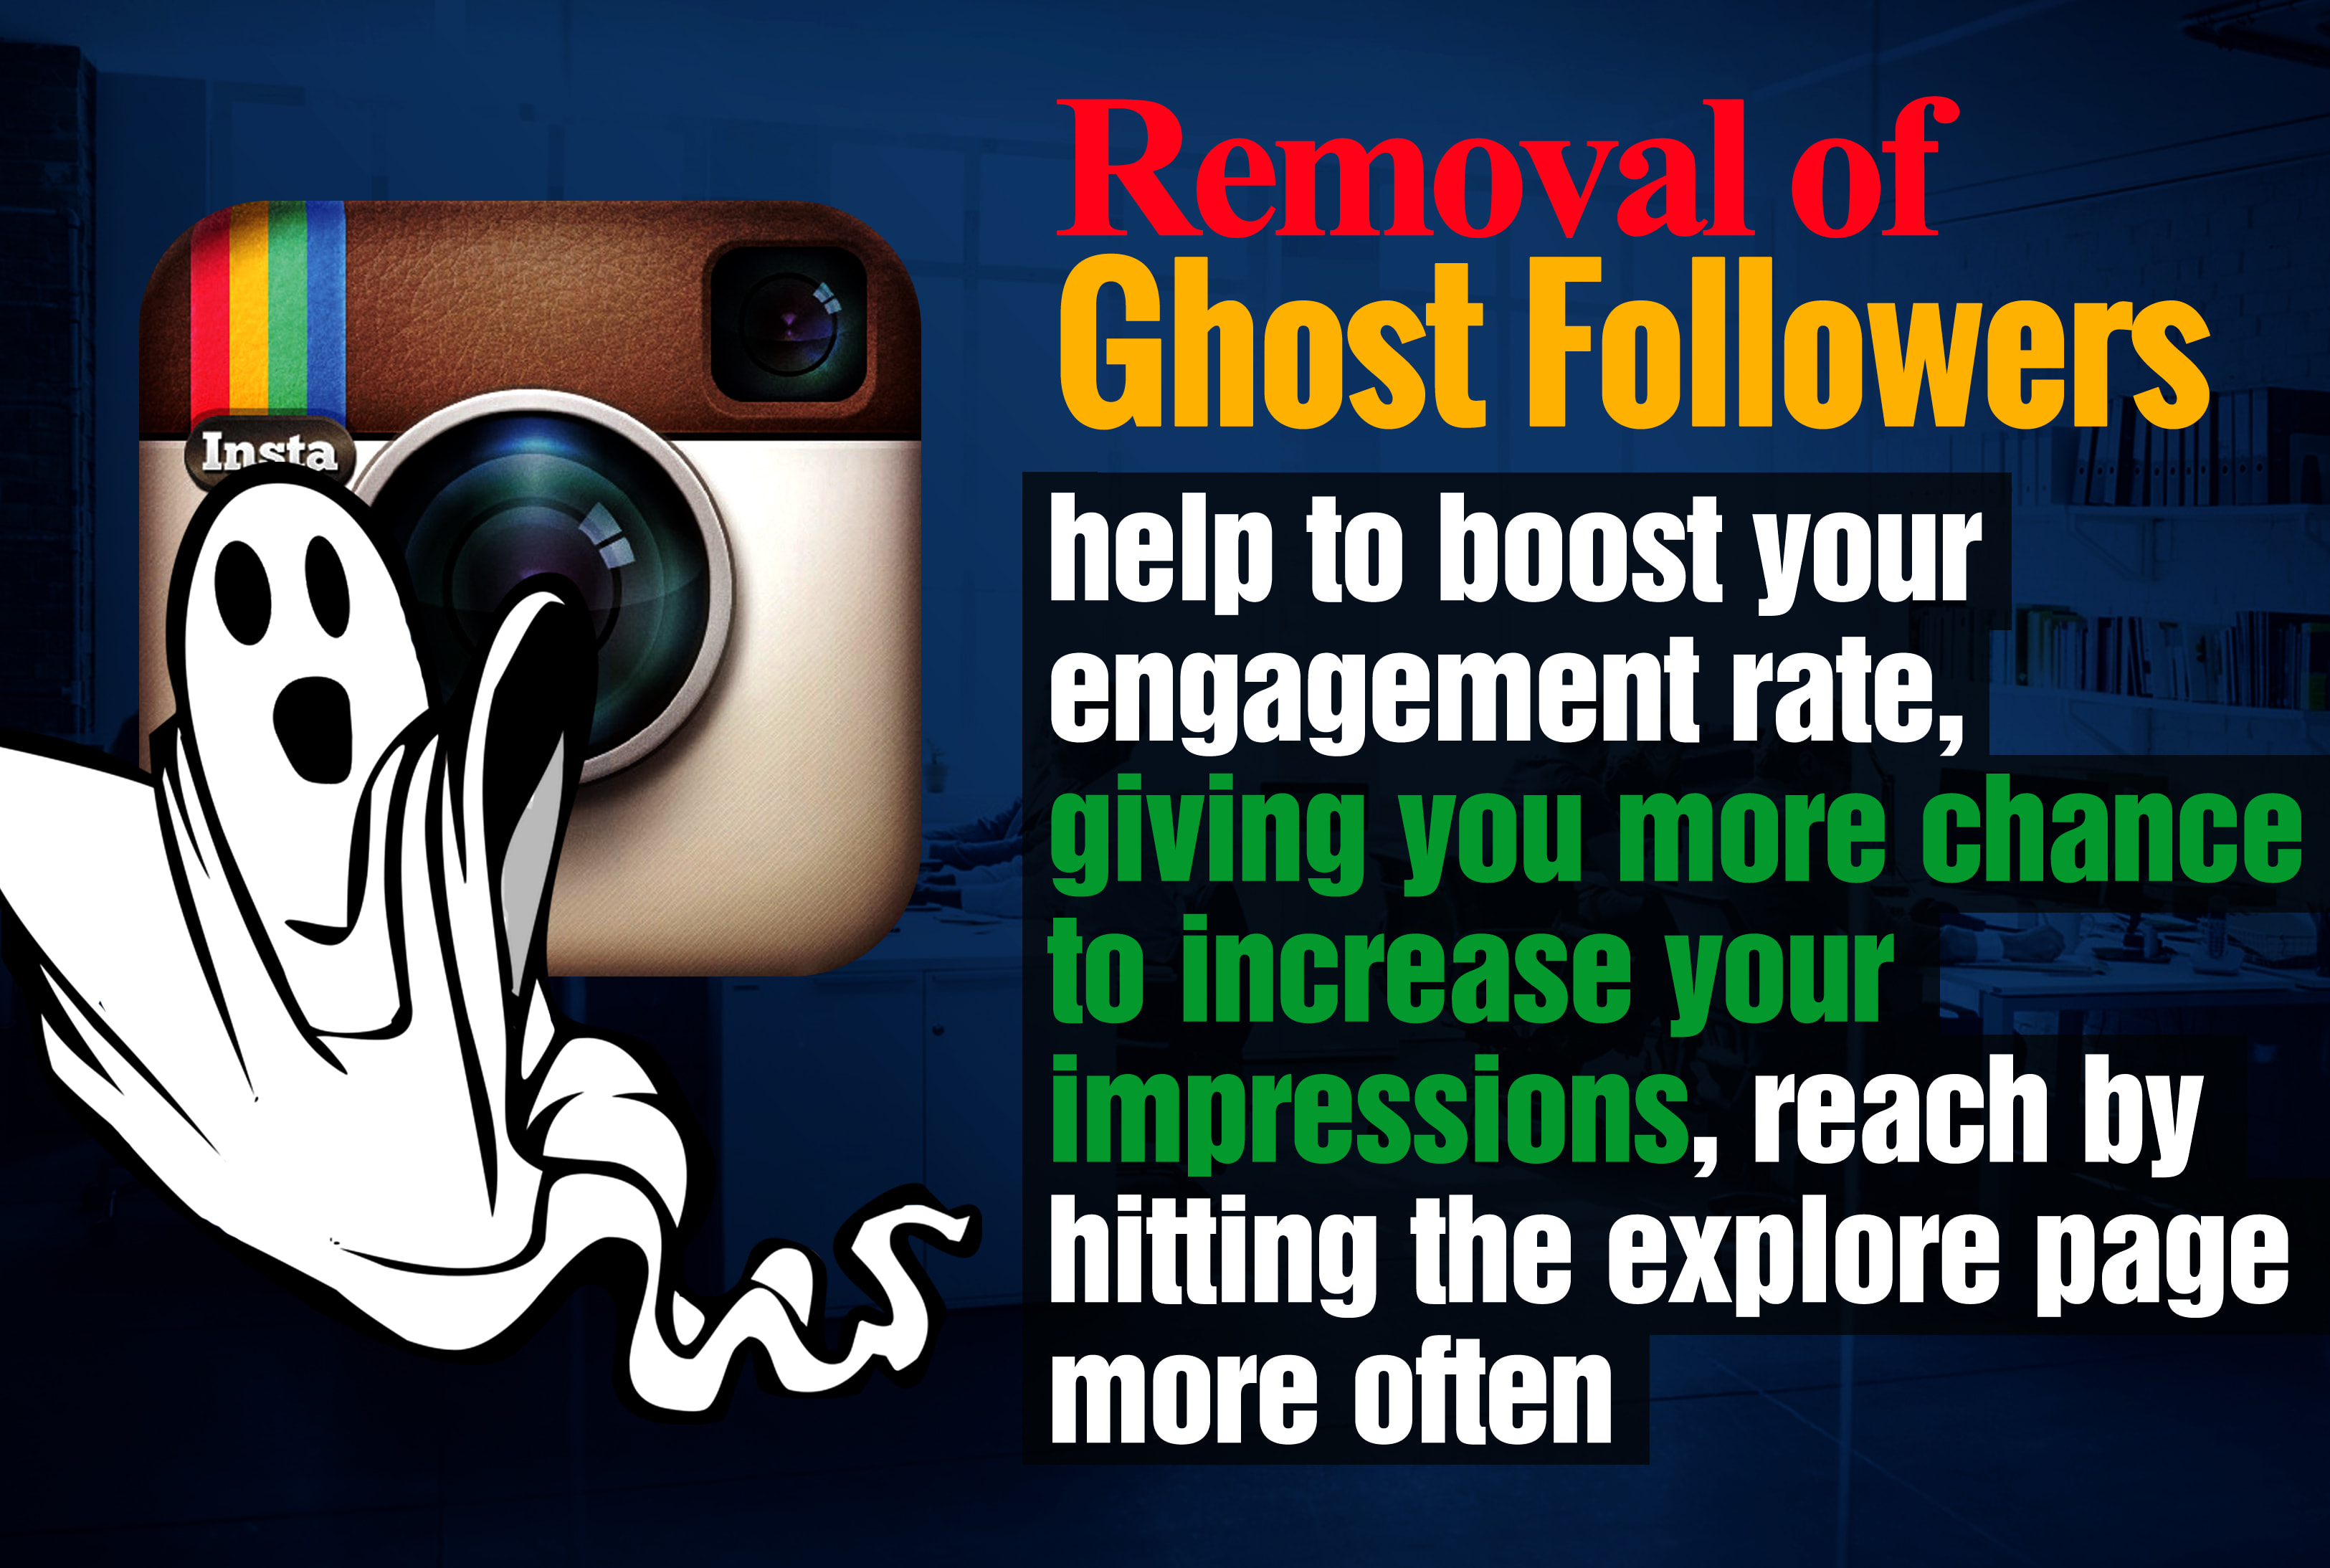  - how do you delete ghost followers on instagram